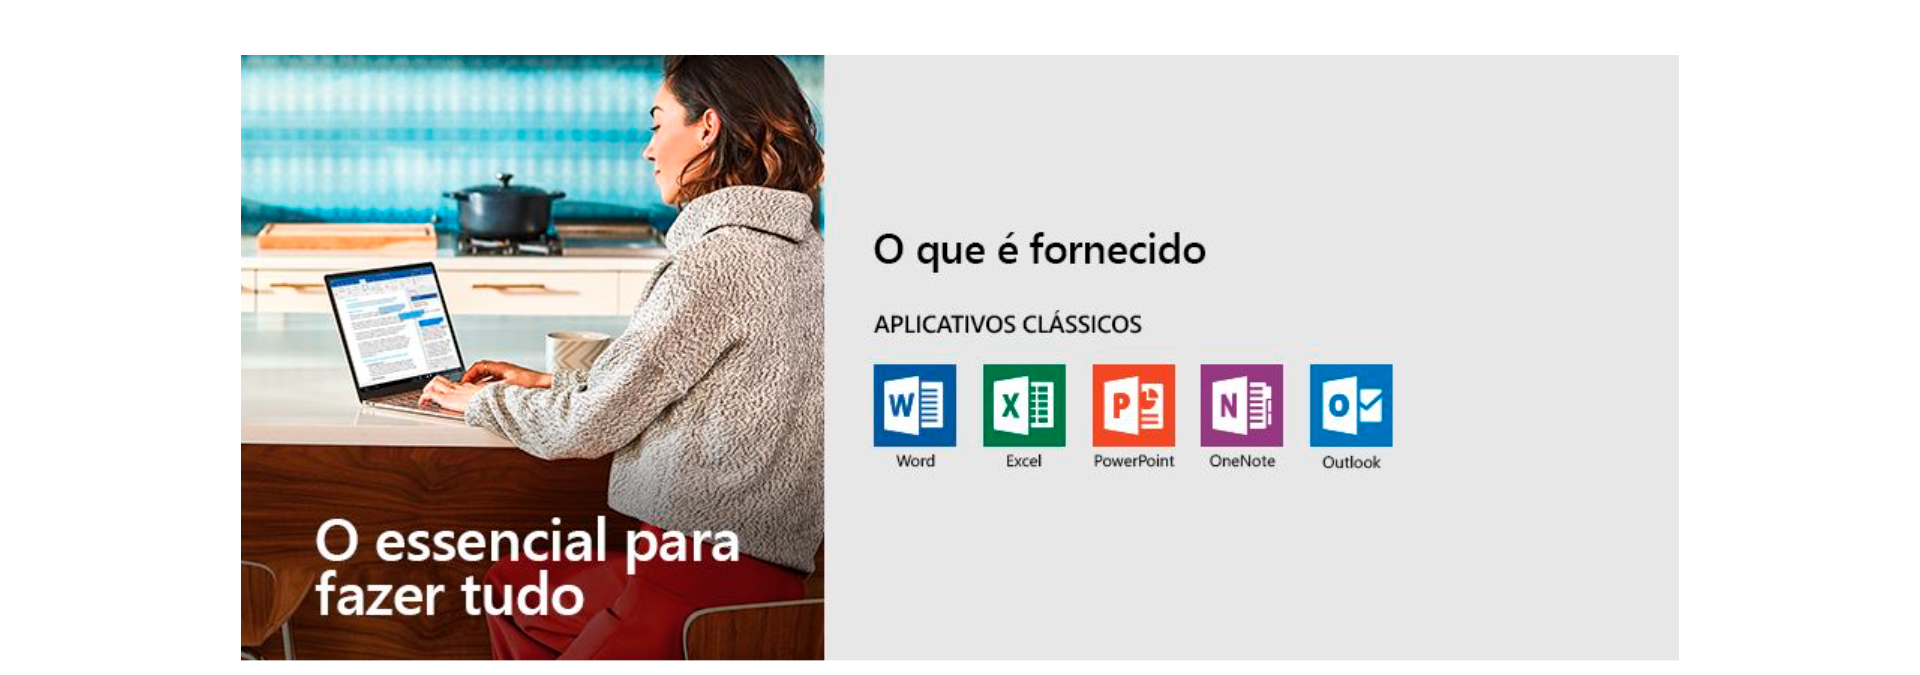 Office 2019 Home and Business Microsoft FPP T5D-03241 - lojaibyte